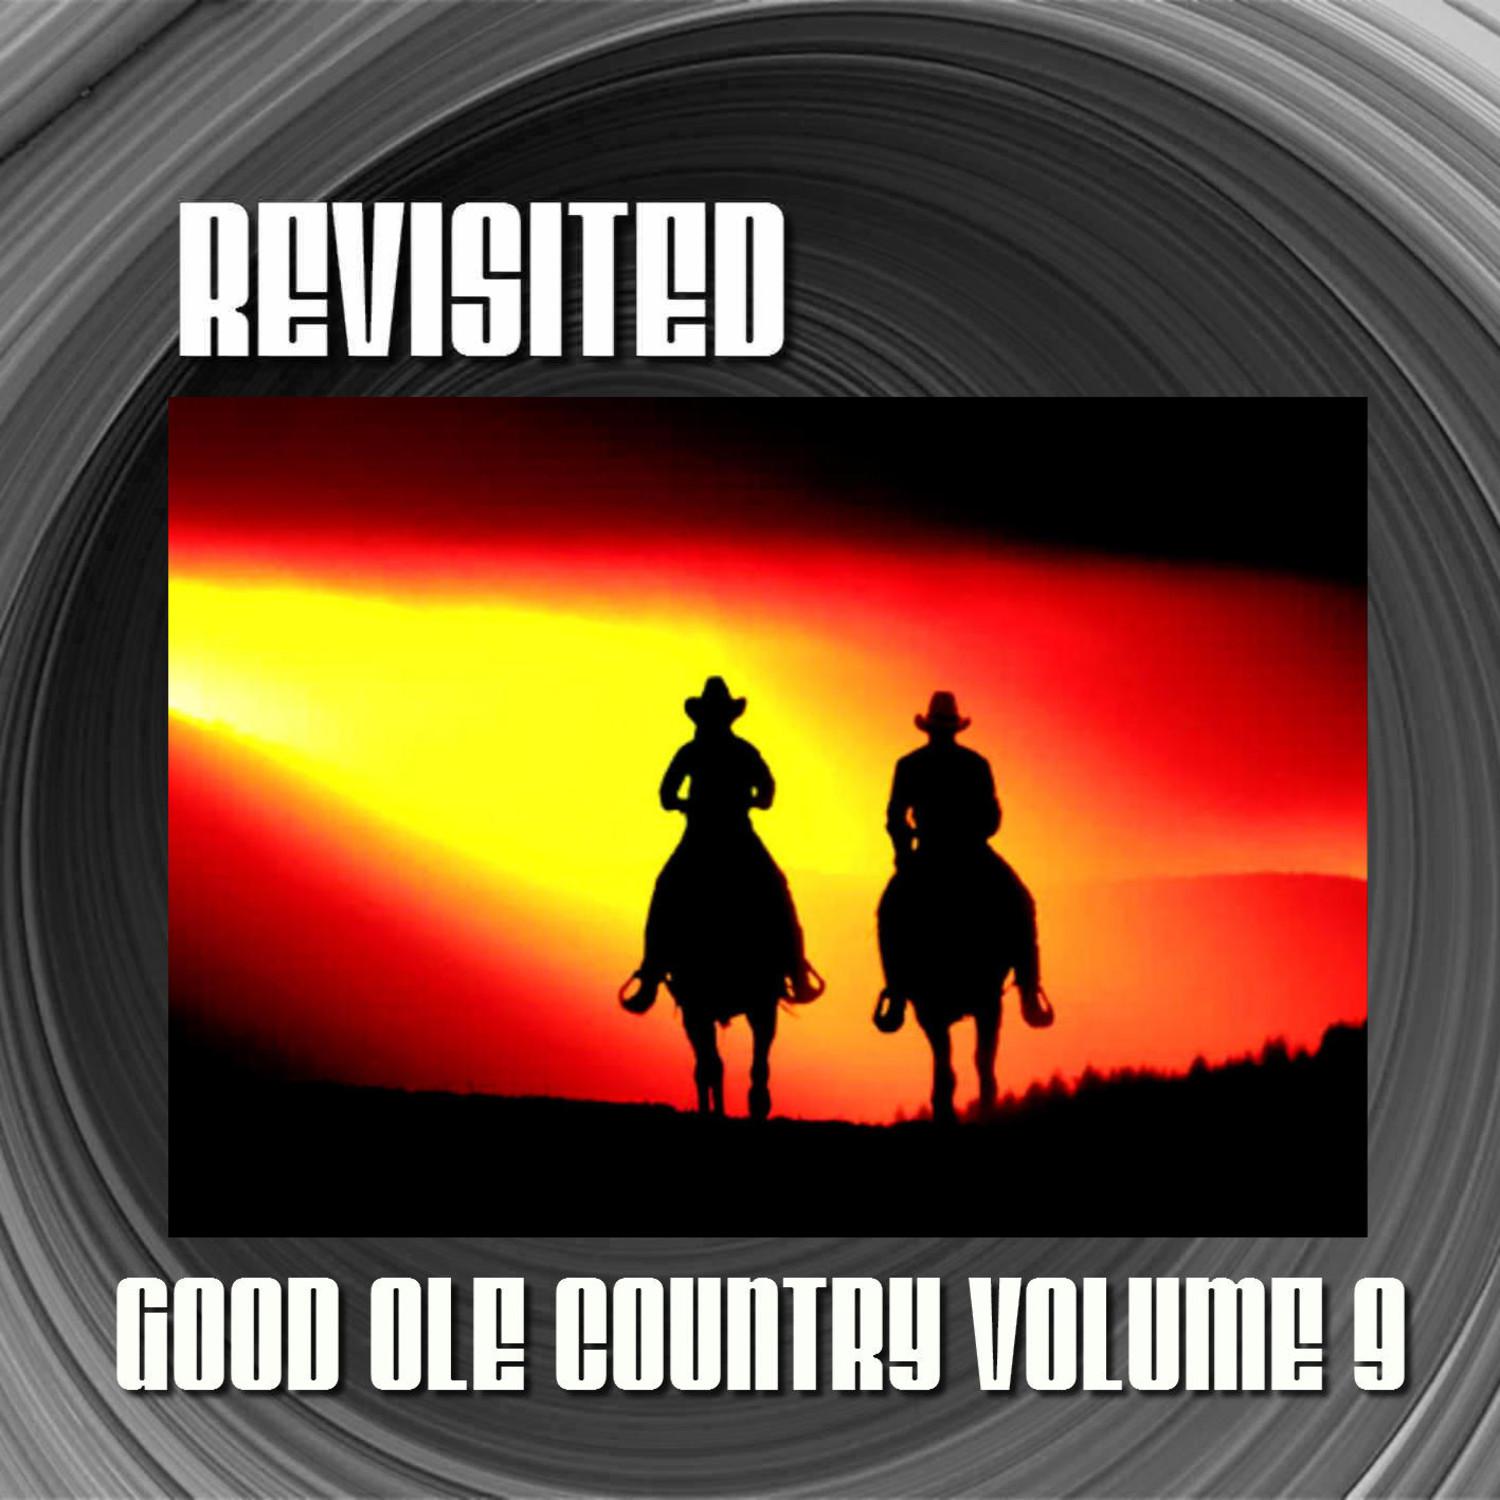 Good Ole Country Vol 9